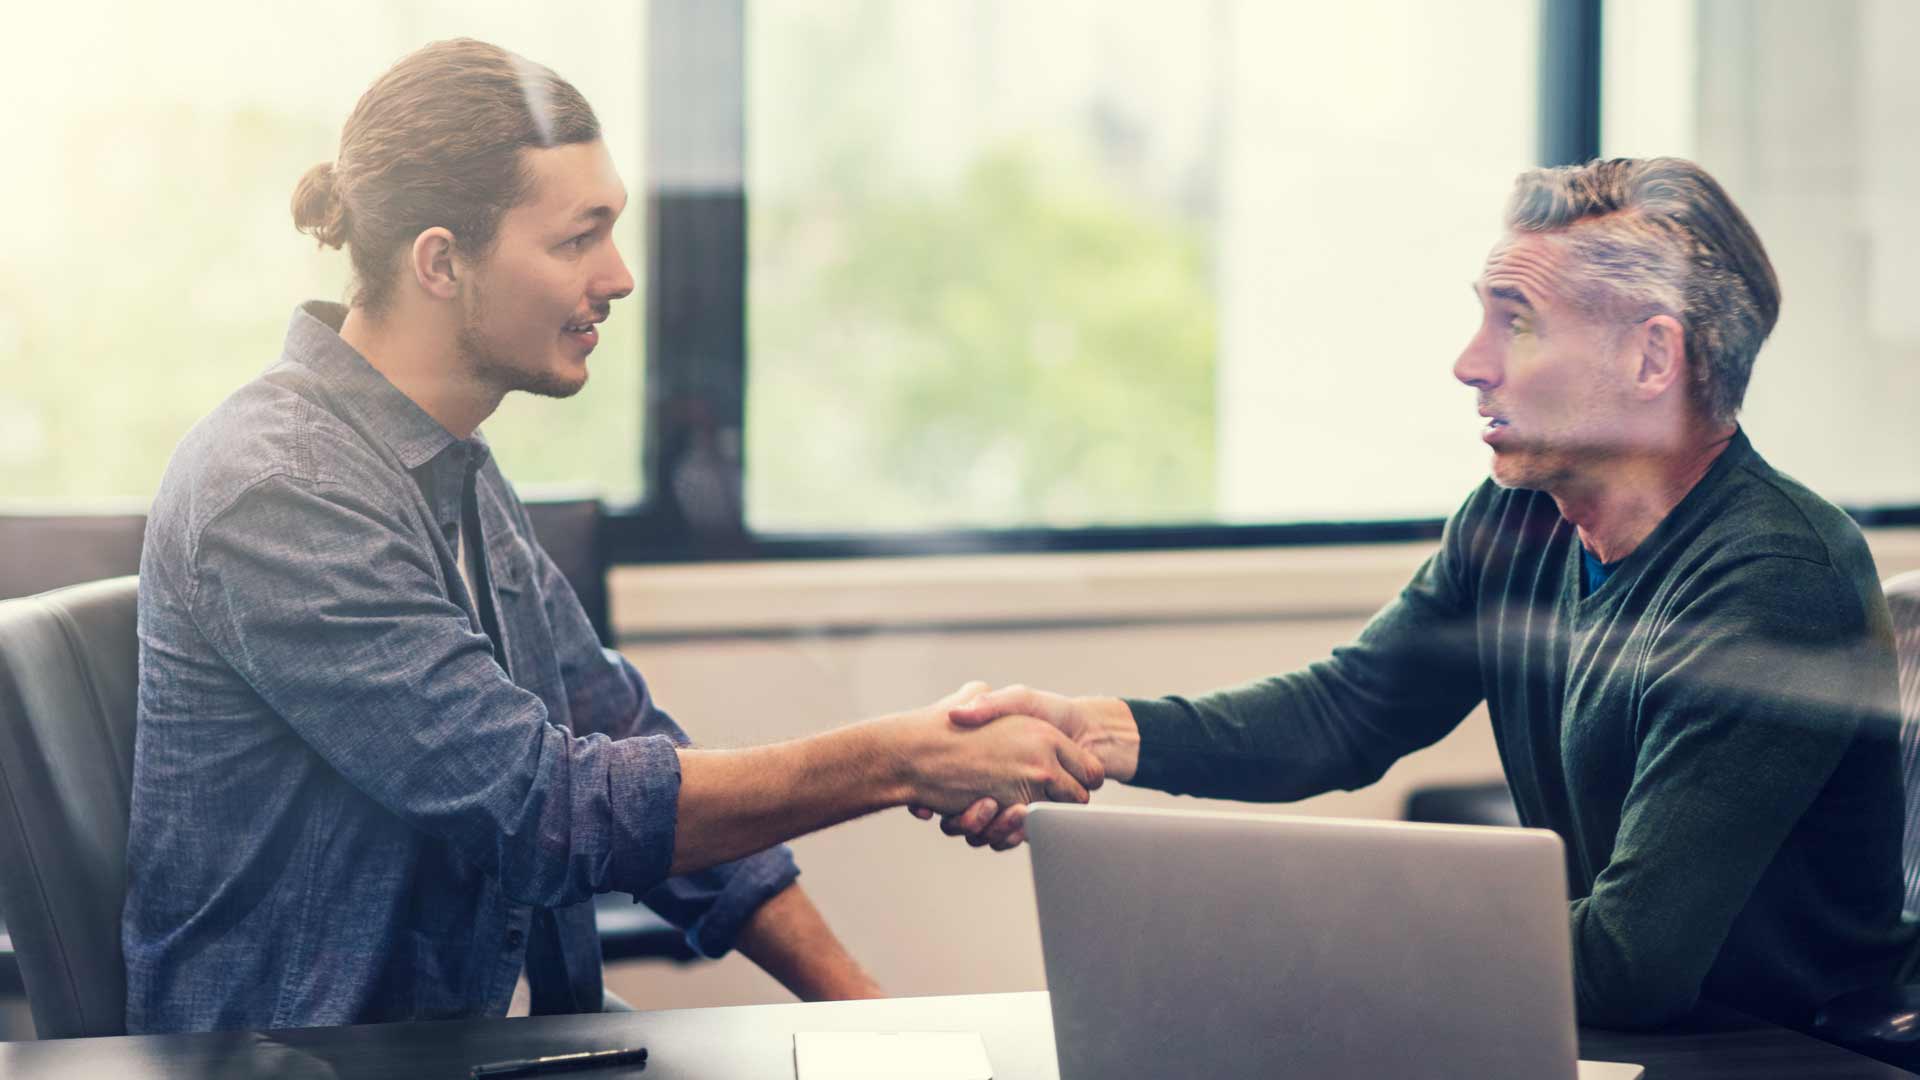 Job hunter shaking hands with interviewer.